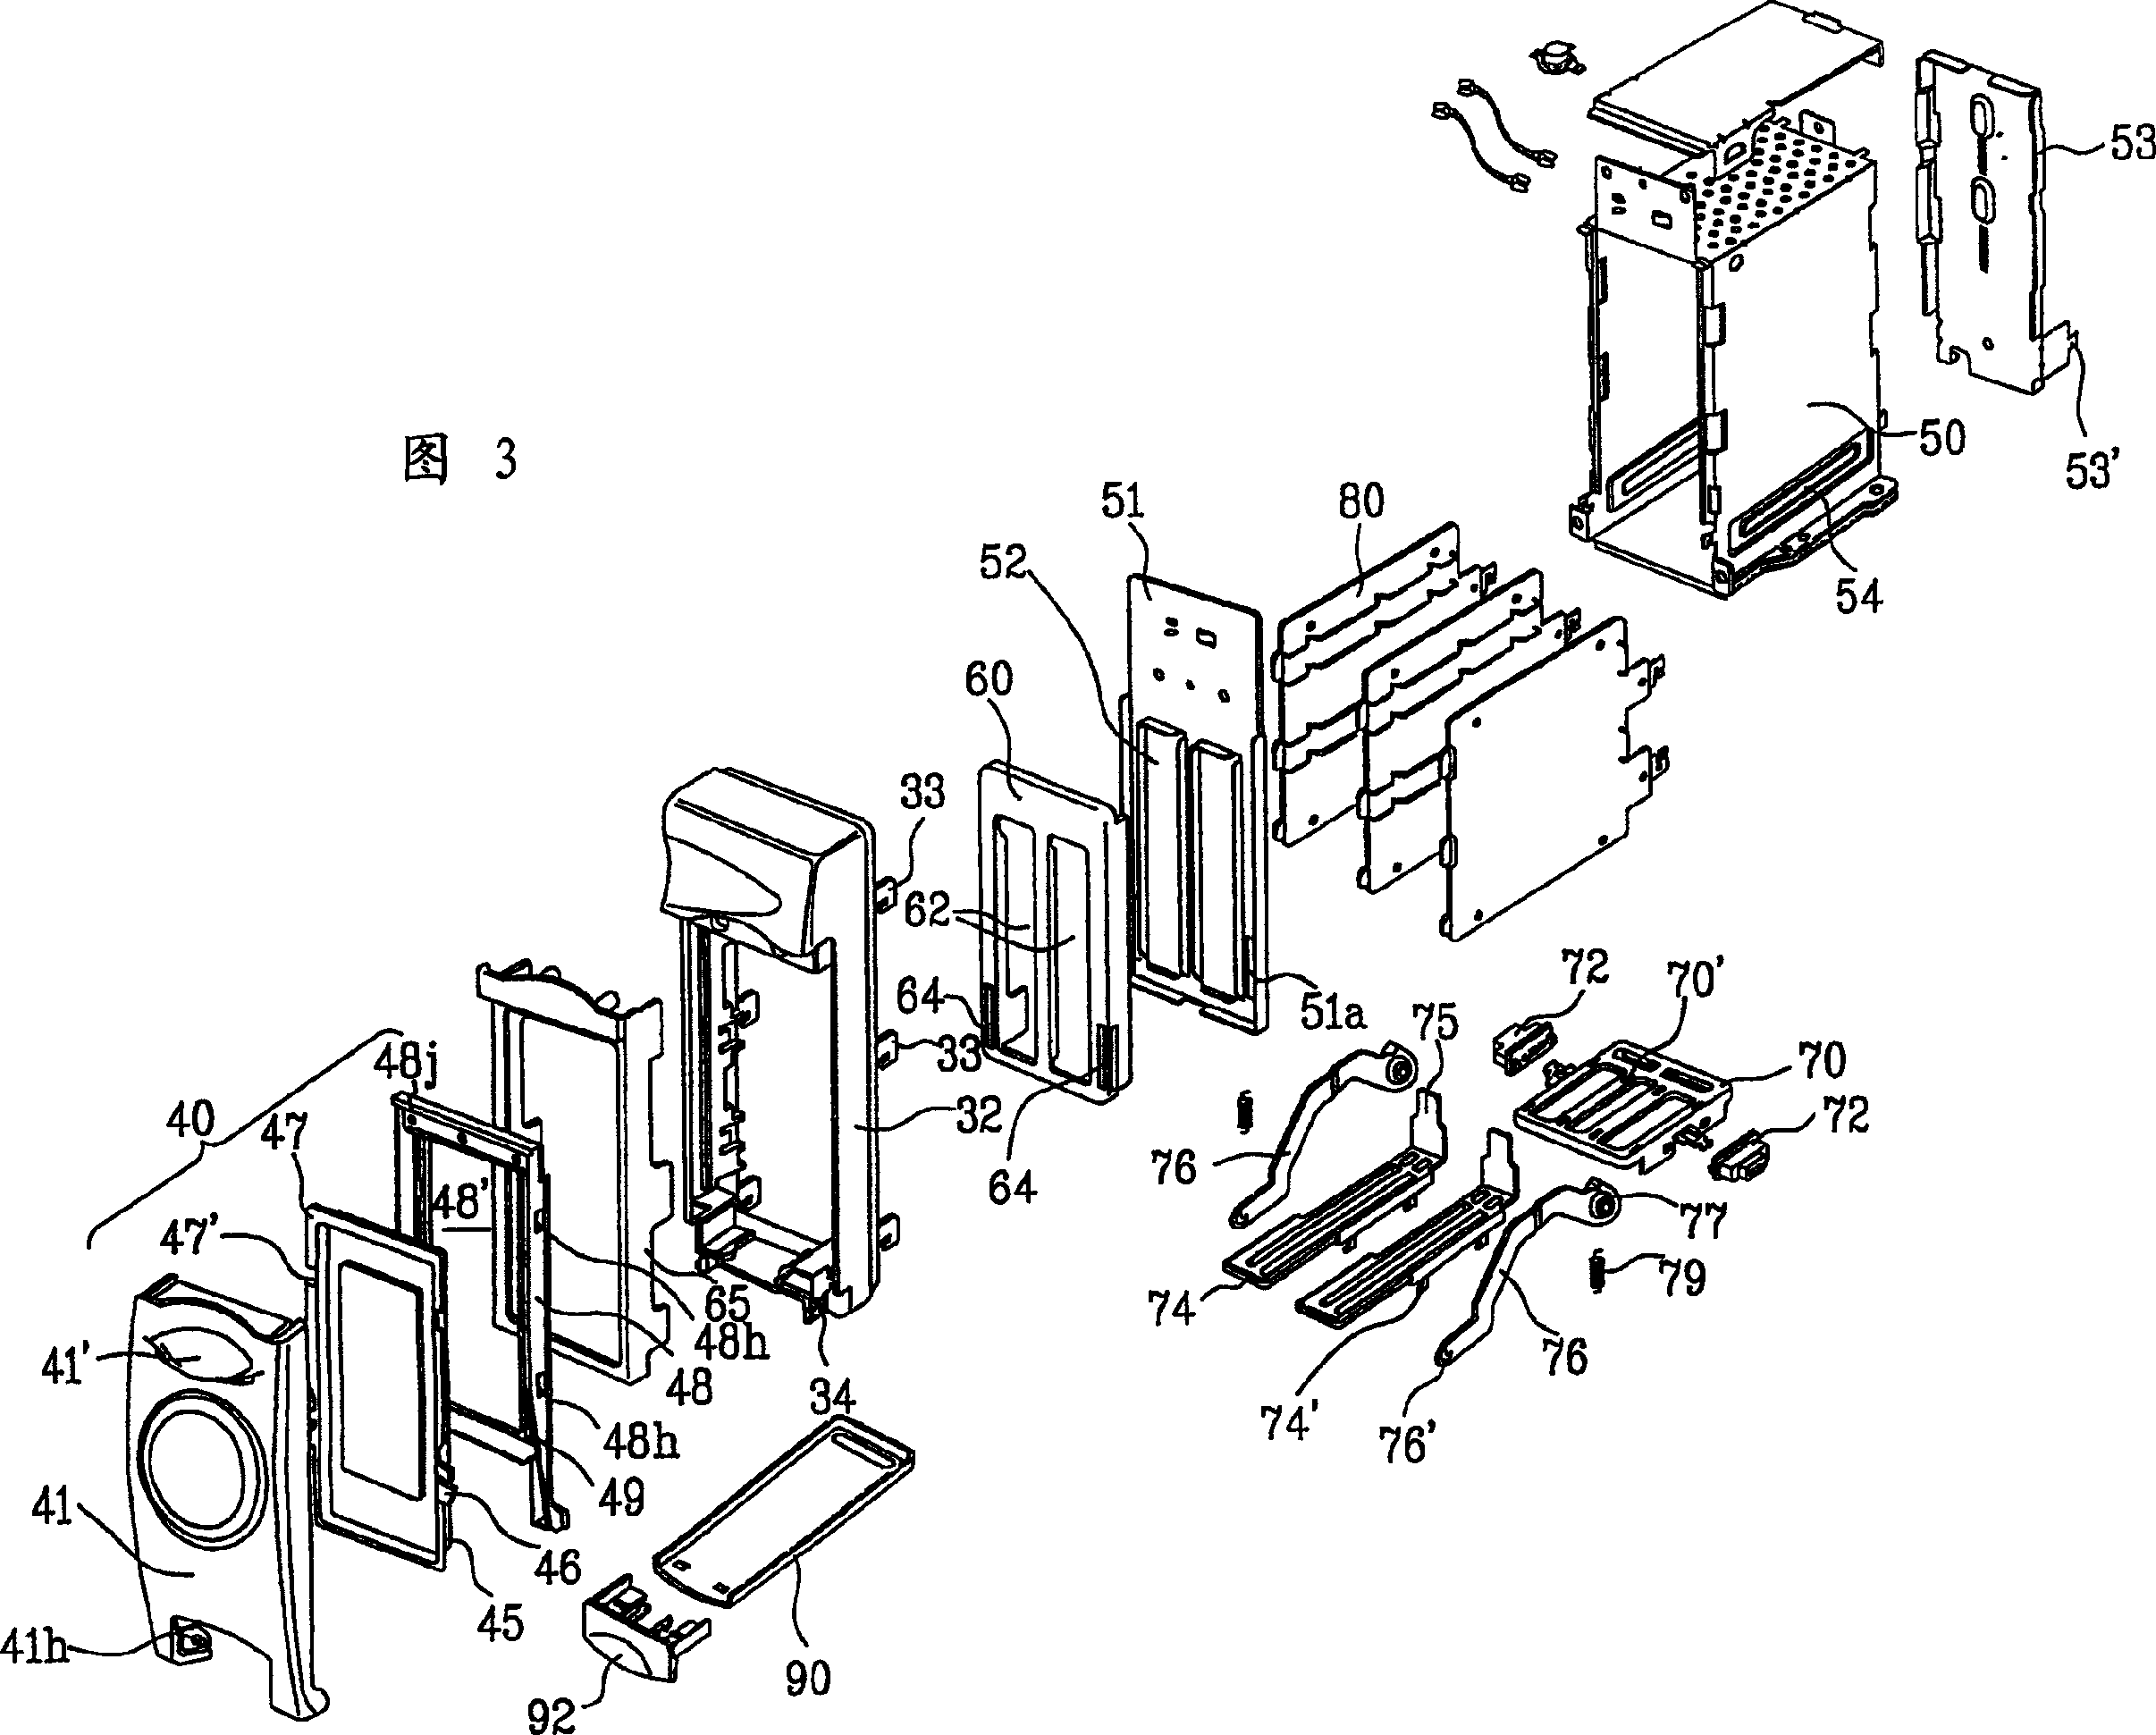 Microwave oven comprising toaster